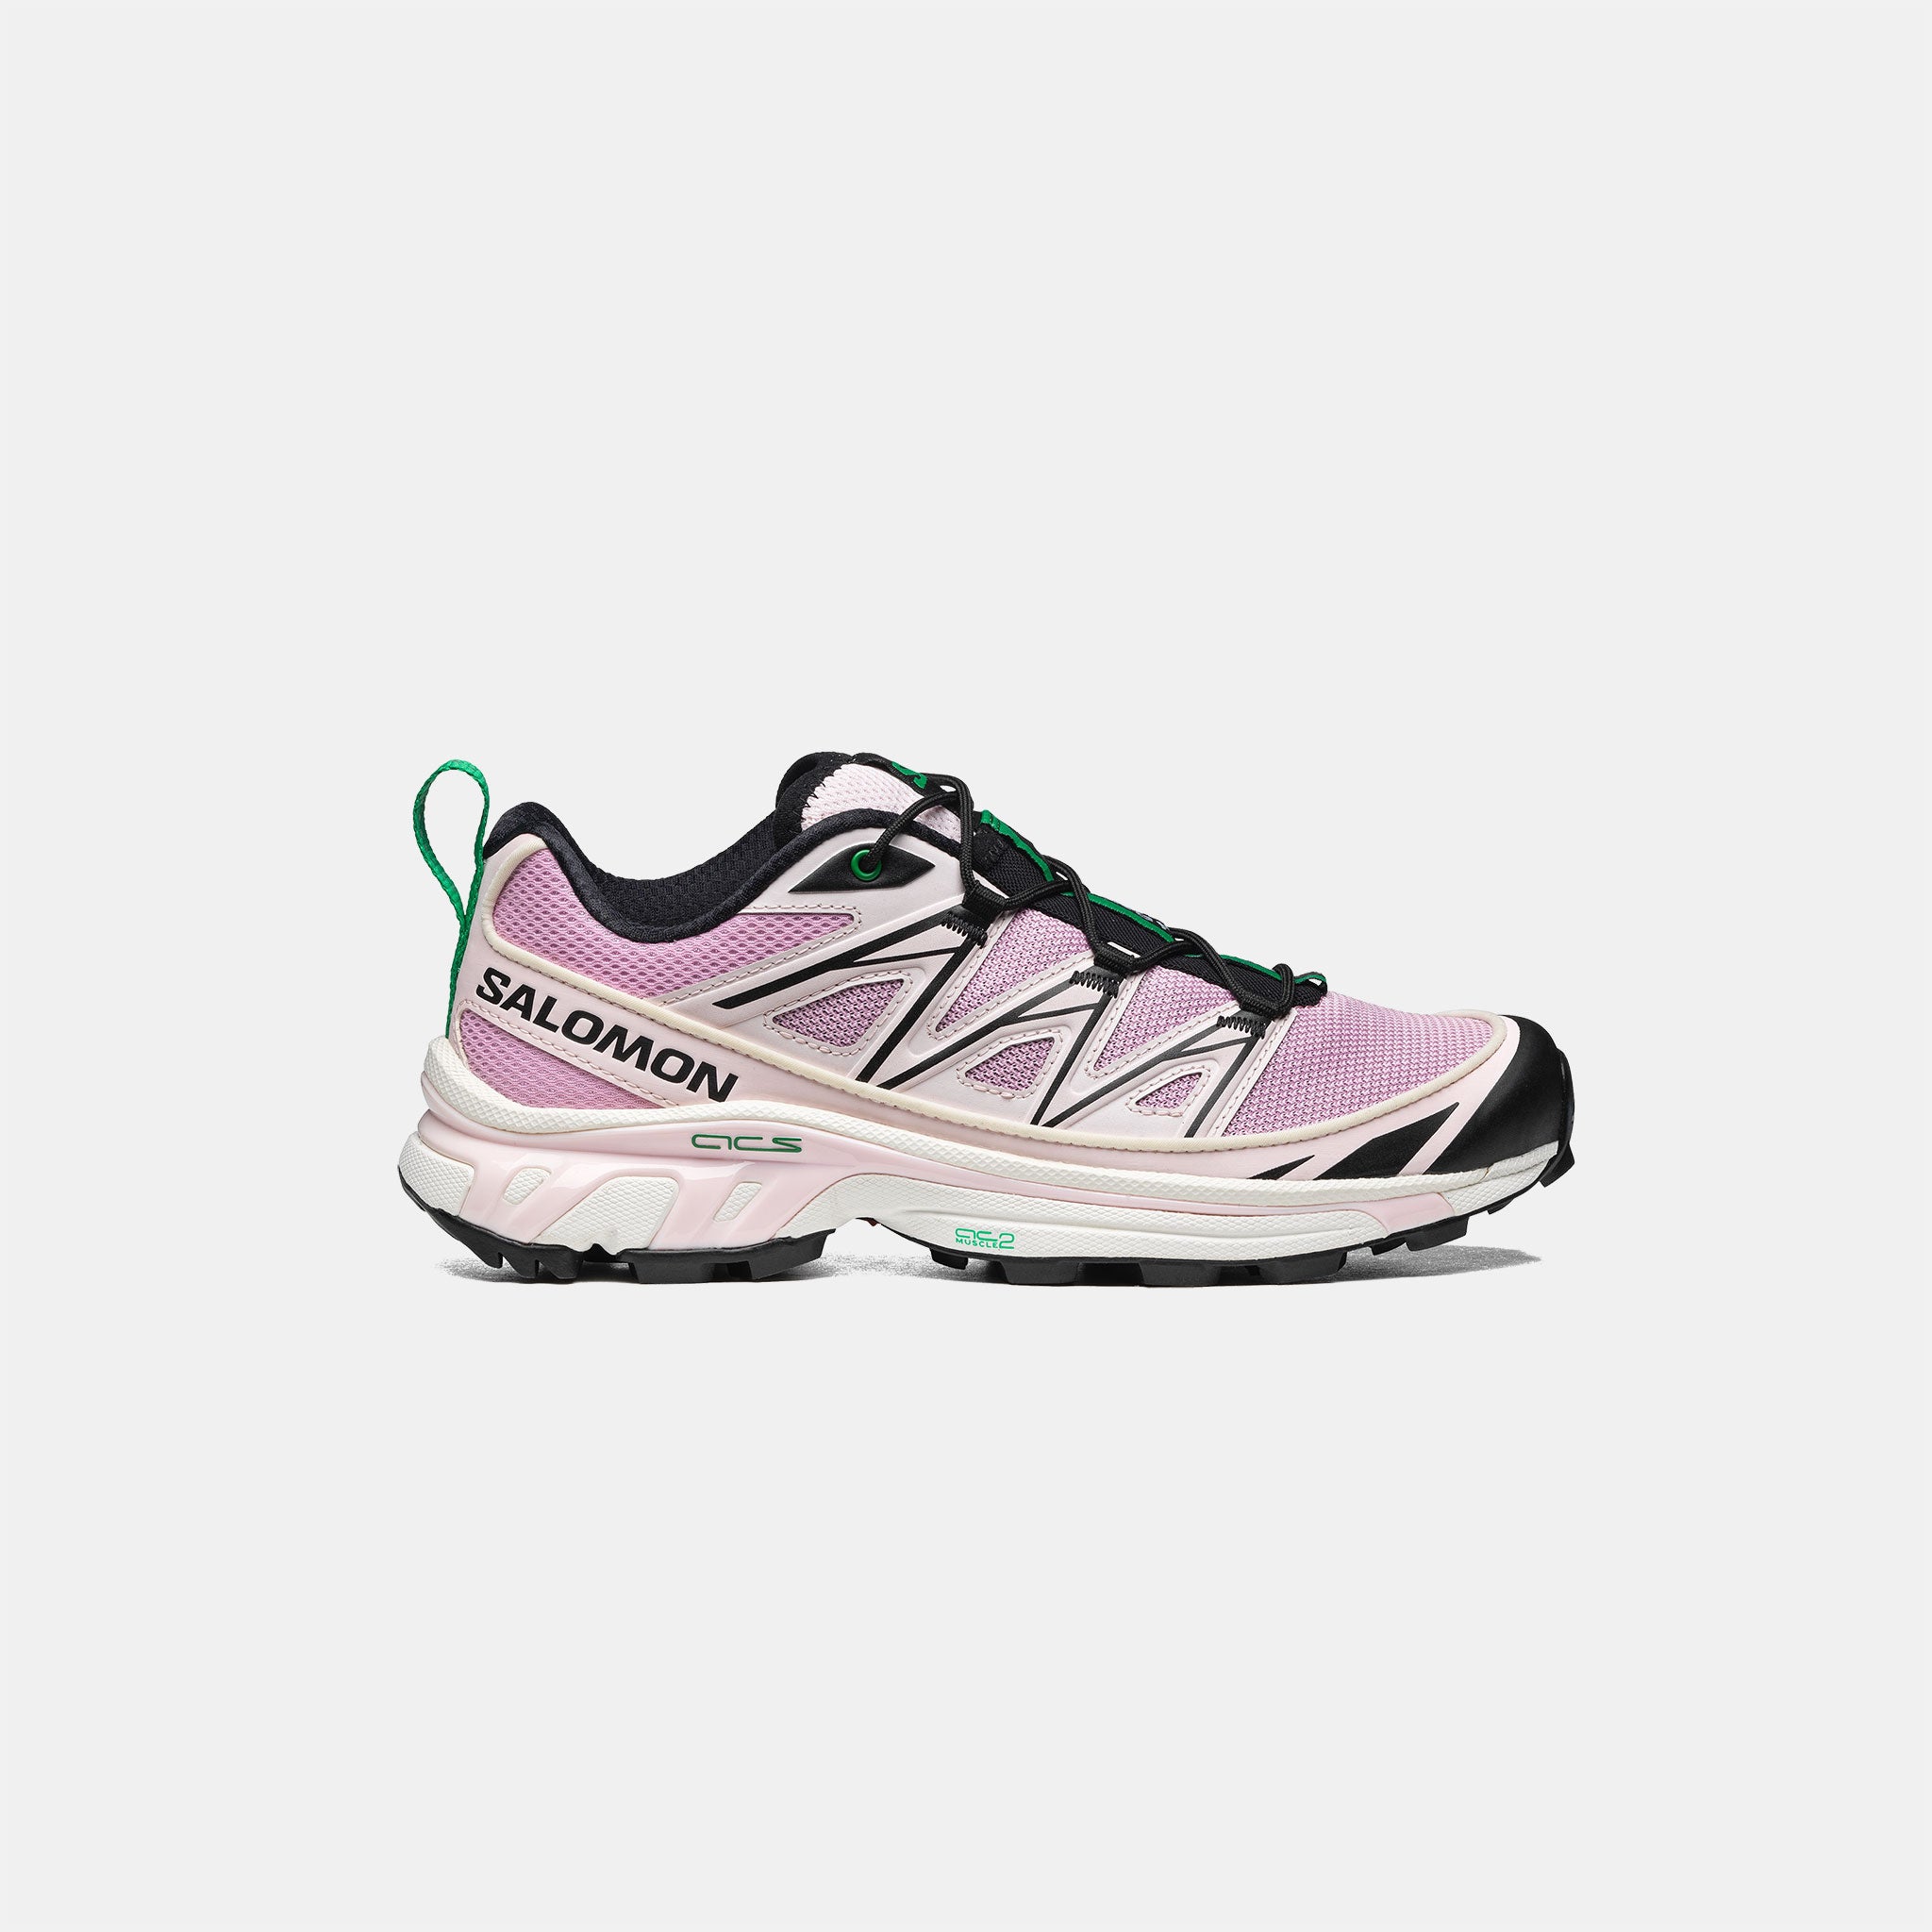 Side view of the pink XT-6 Expanse sneaker by Salomon for Sandy Liang, with white sole and black trim.